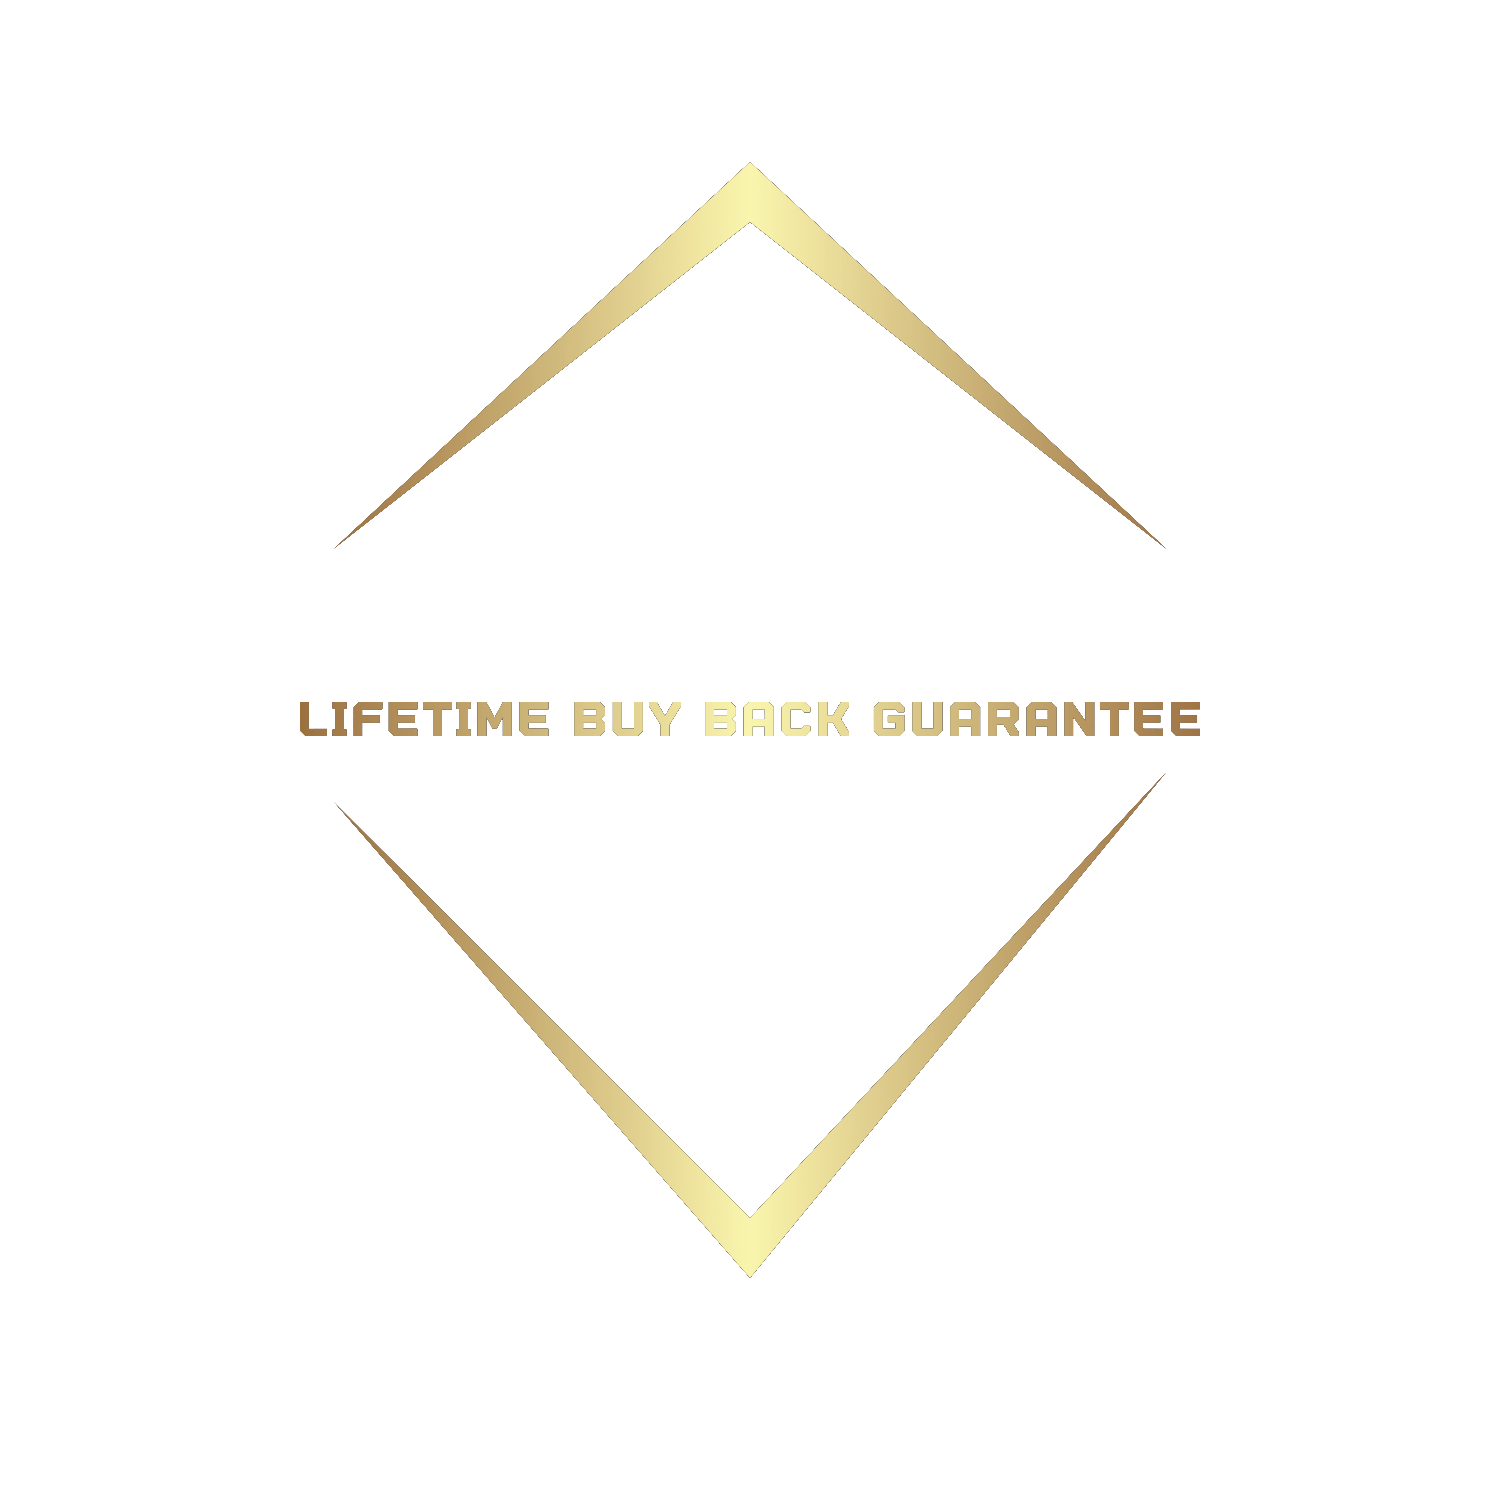 Image of 2 Golden Shapes with a text of "Lifetime buyback Guarantee" in between of them